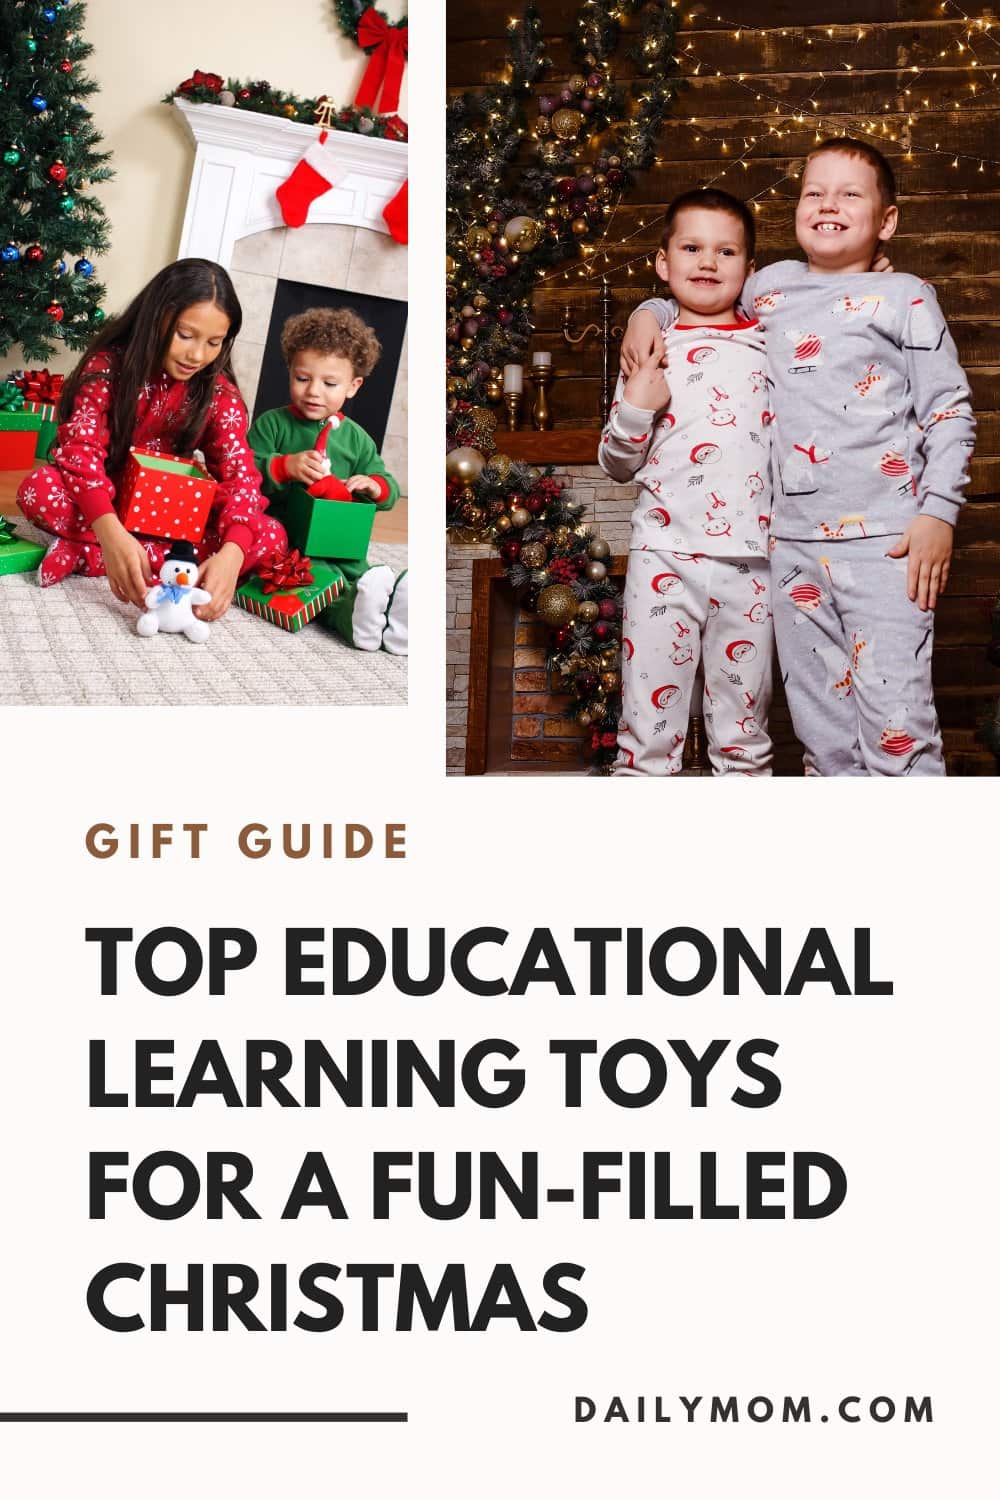 Top 28 Educational Learning Toys For A Fun-Filled Christmas 99 Daily Mom, Magazine For Families